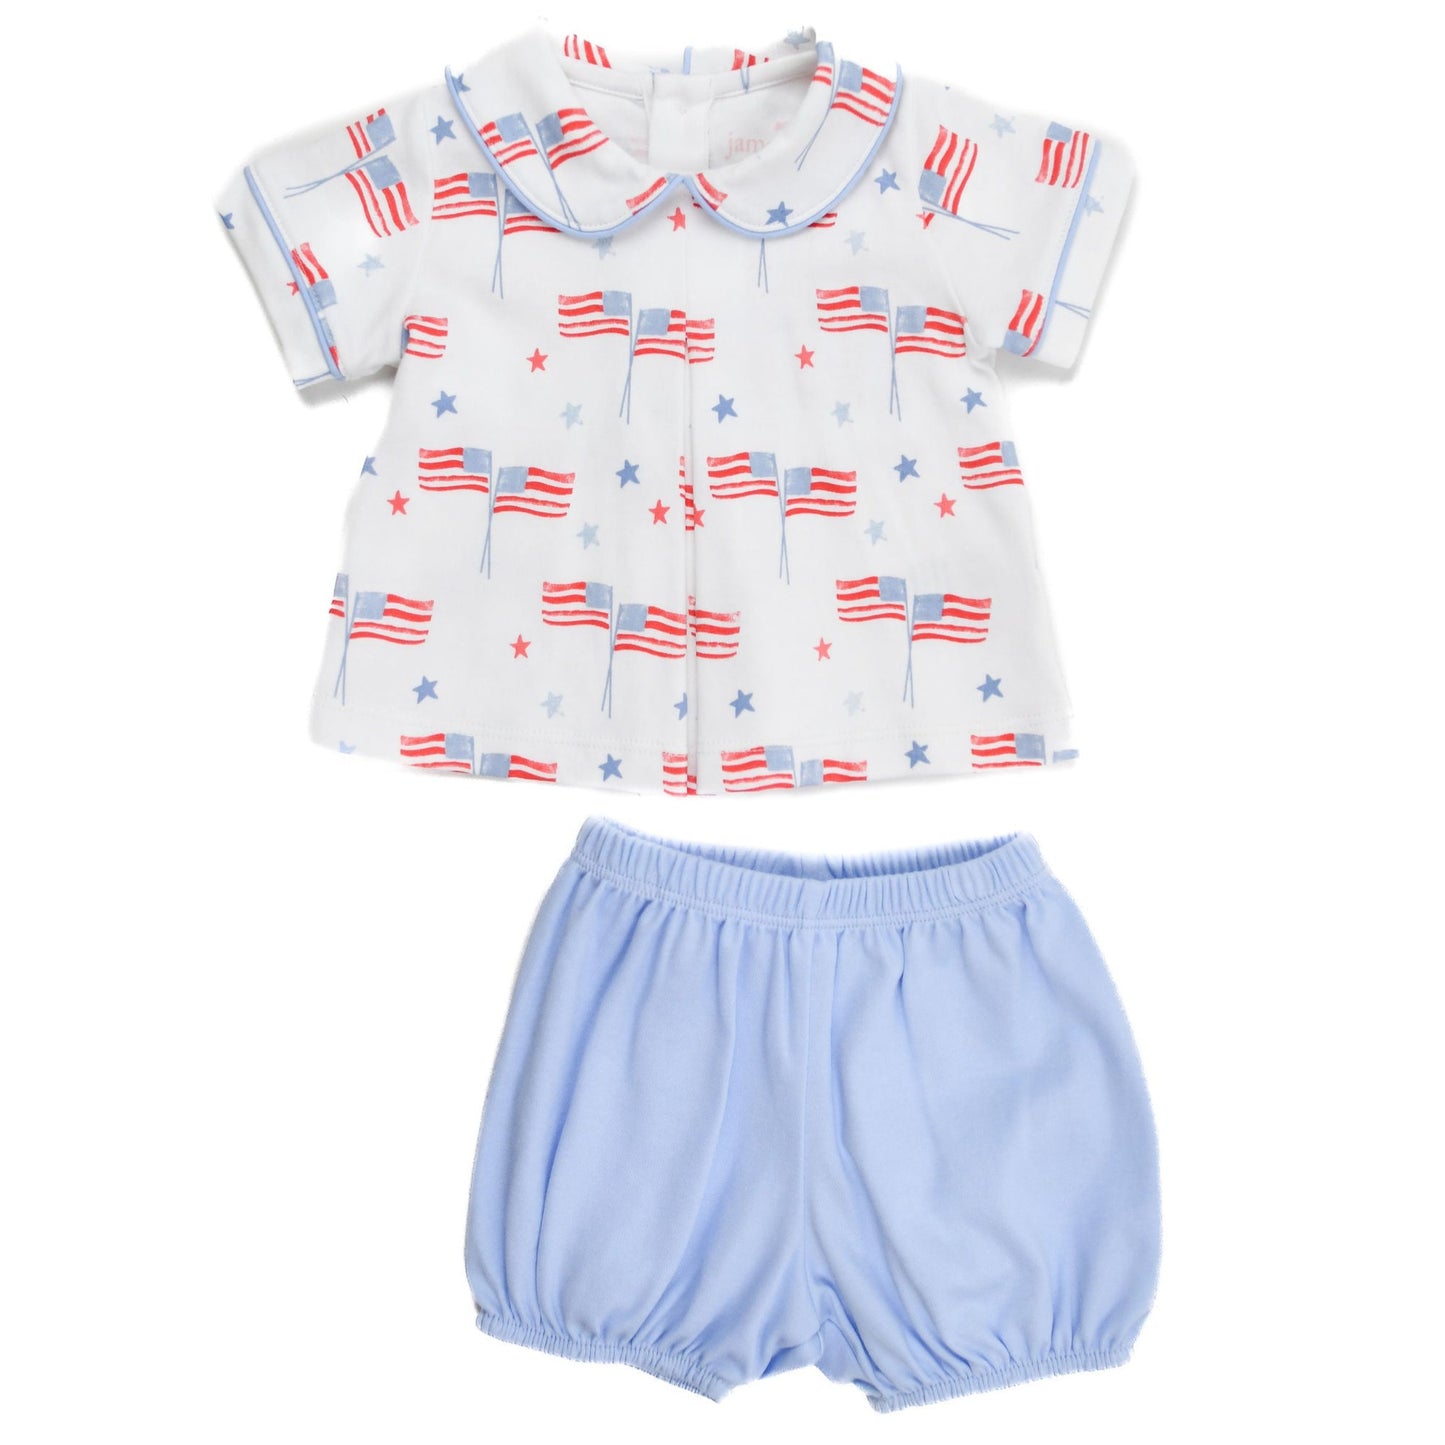 Our Country Flag James and Lottie Boys Bloomer Set